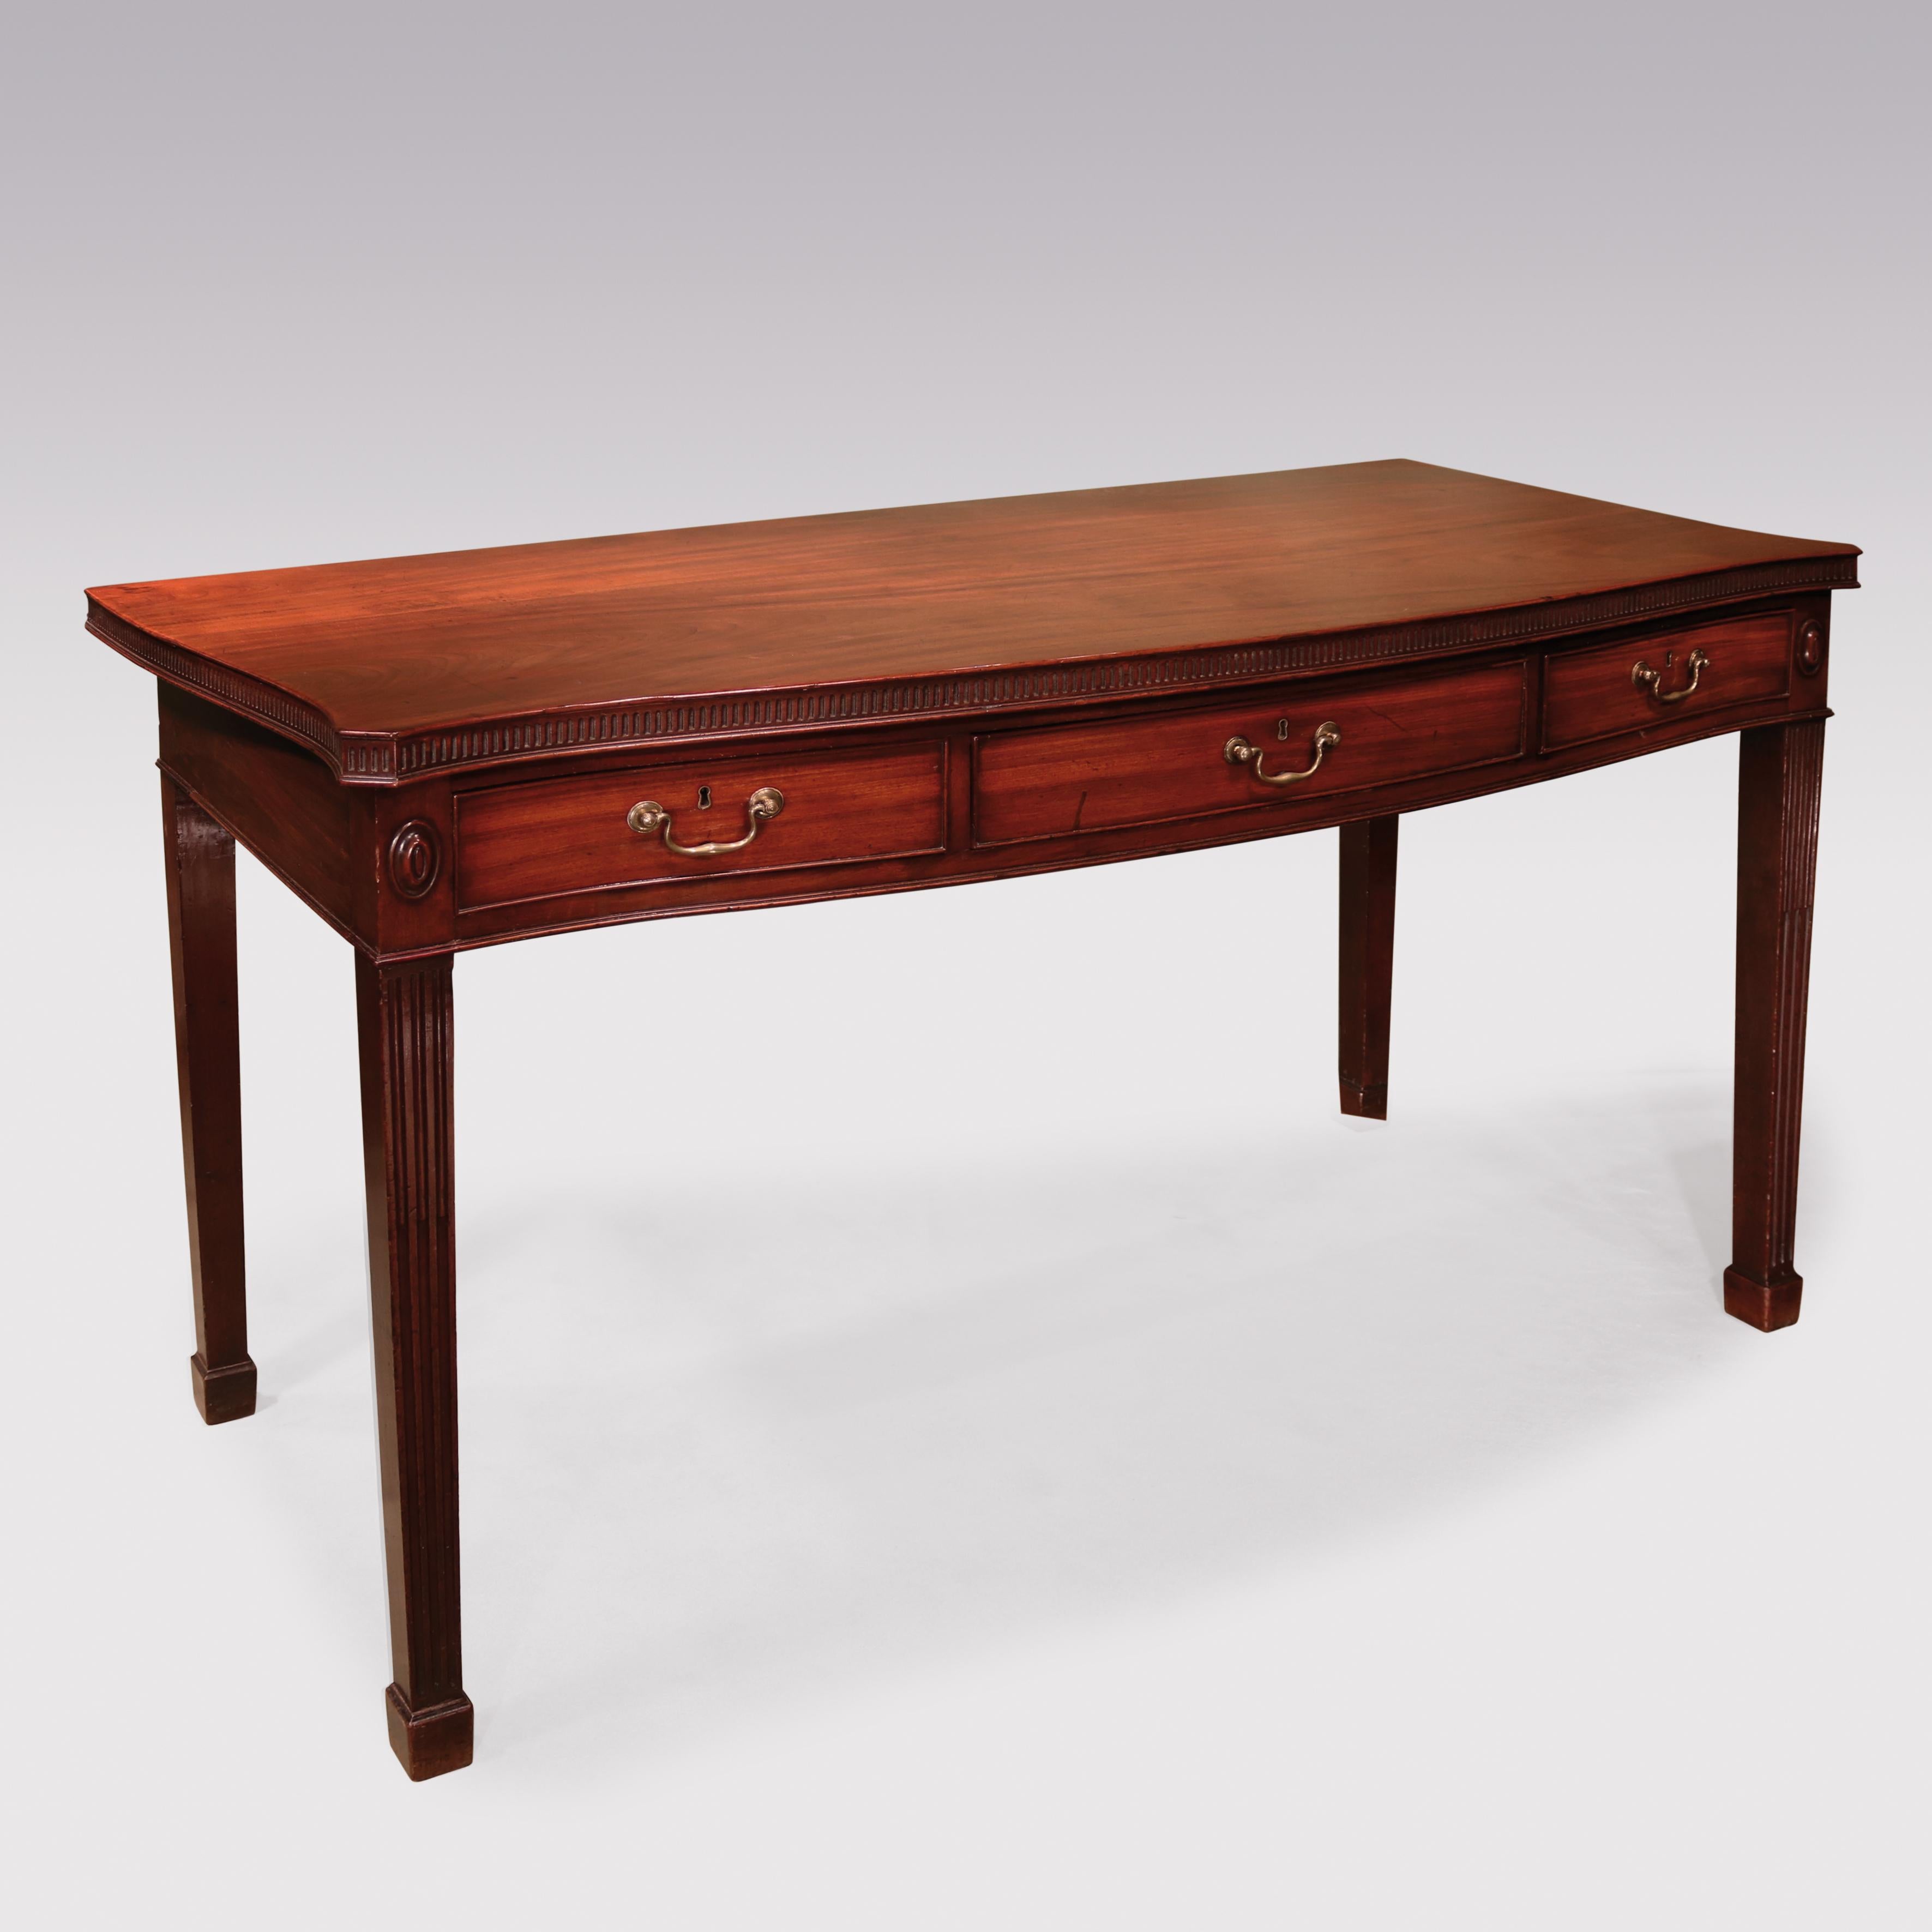 A fine mid-18th century Chippendale period plain figured mahogany serving table, having fluted edged serpentine top above frieze containing 3 cockbeaded drawers flanked by oval paterae, supported on stop-fluted square tapering legs ending on block